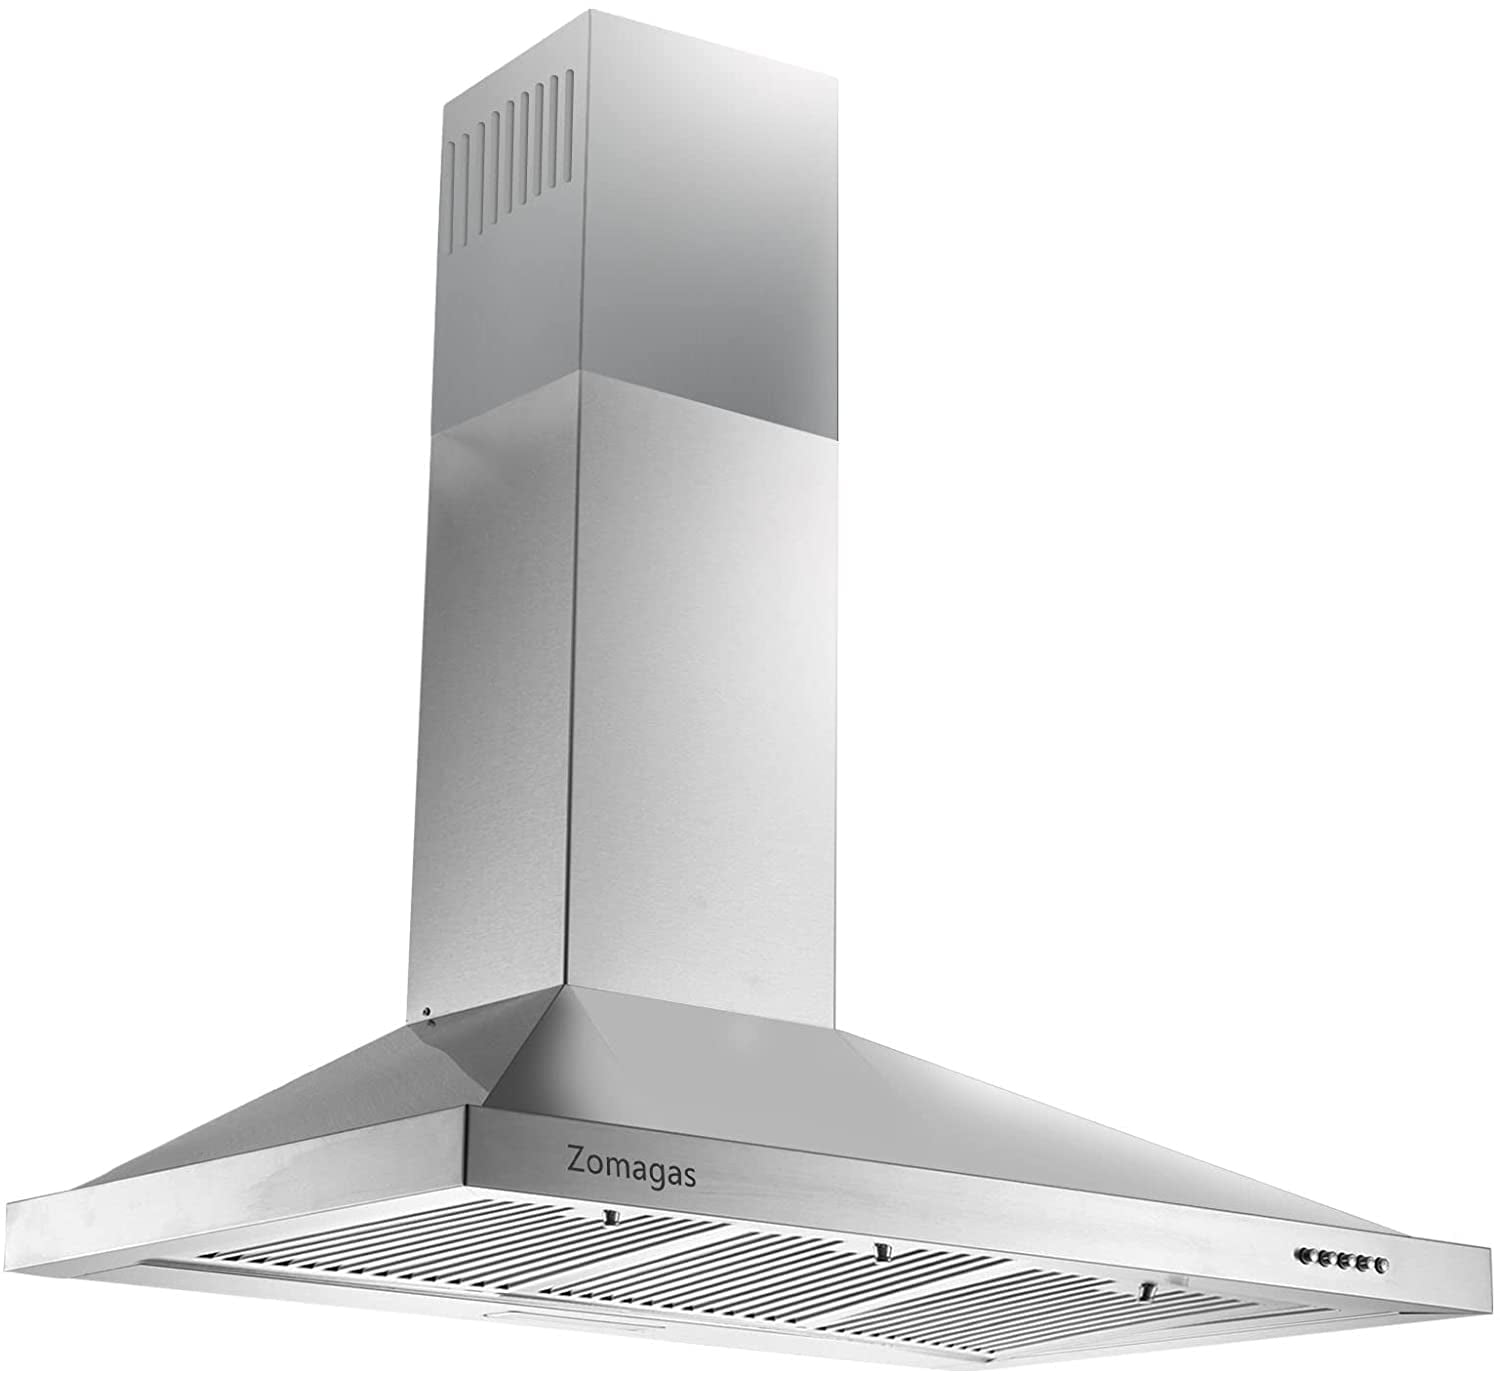 Range Hood 36-inch Wall Mount Vent Hood Stainless Steel Ducted/Ductless 3  Speed Exhaust Fan 